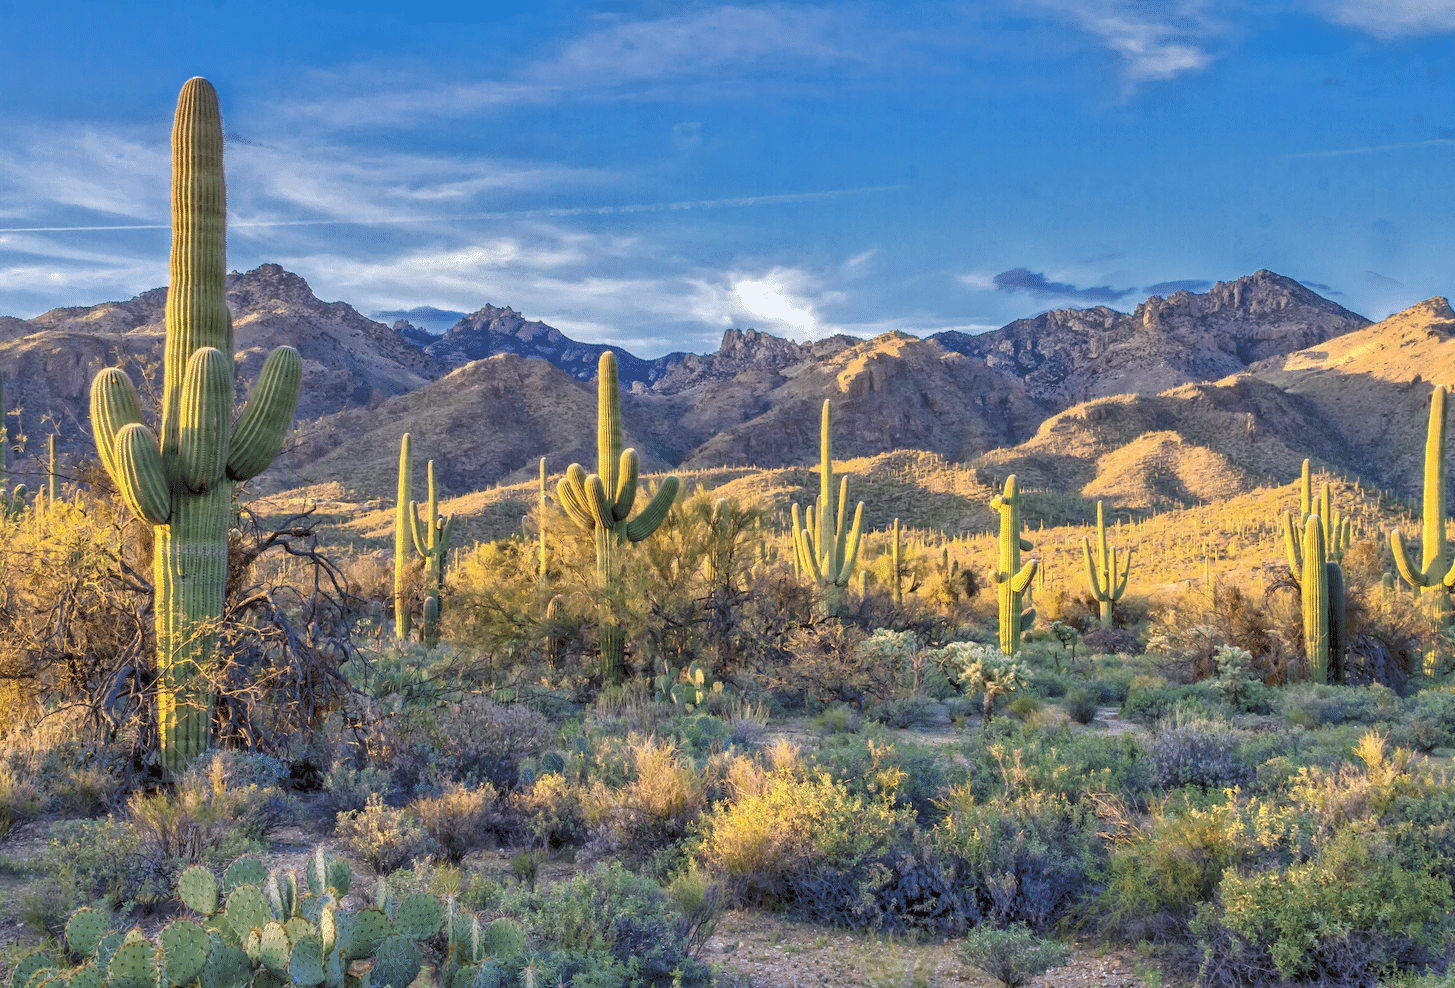 Sabino Canyon, Catalina Foothills (located in the Coronado National Forest)